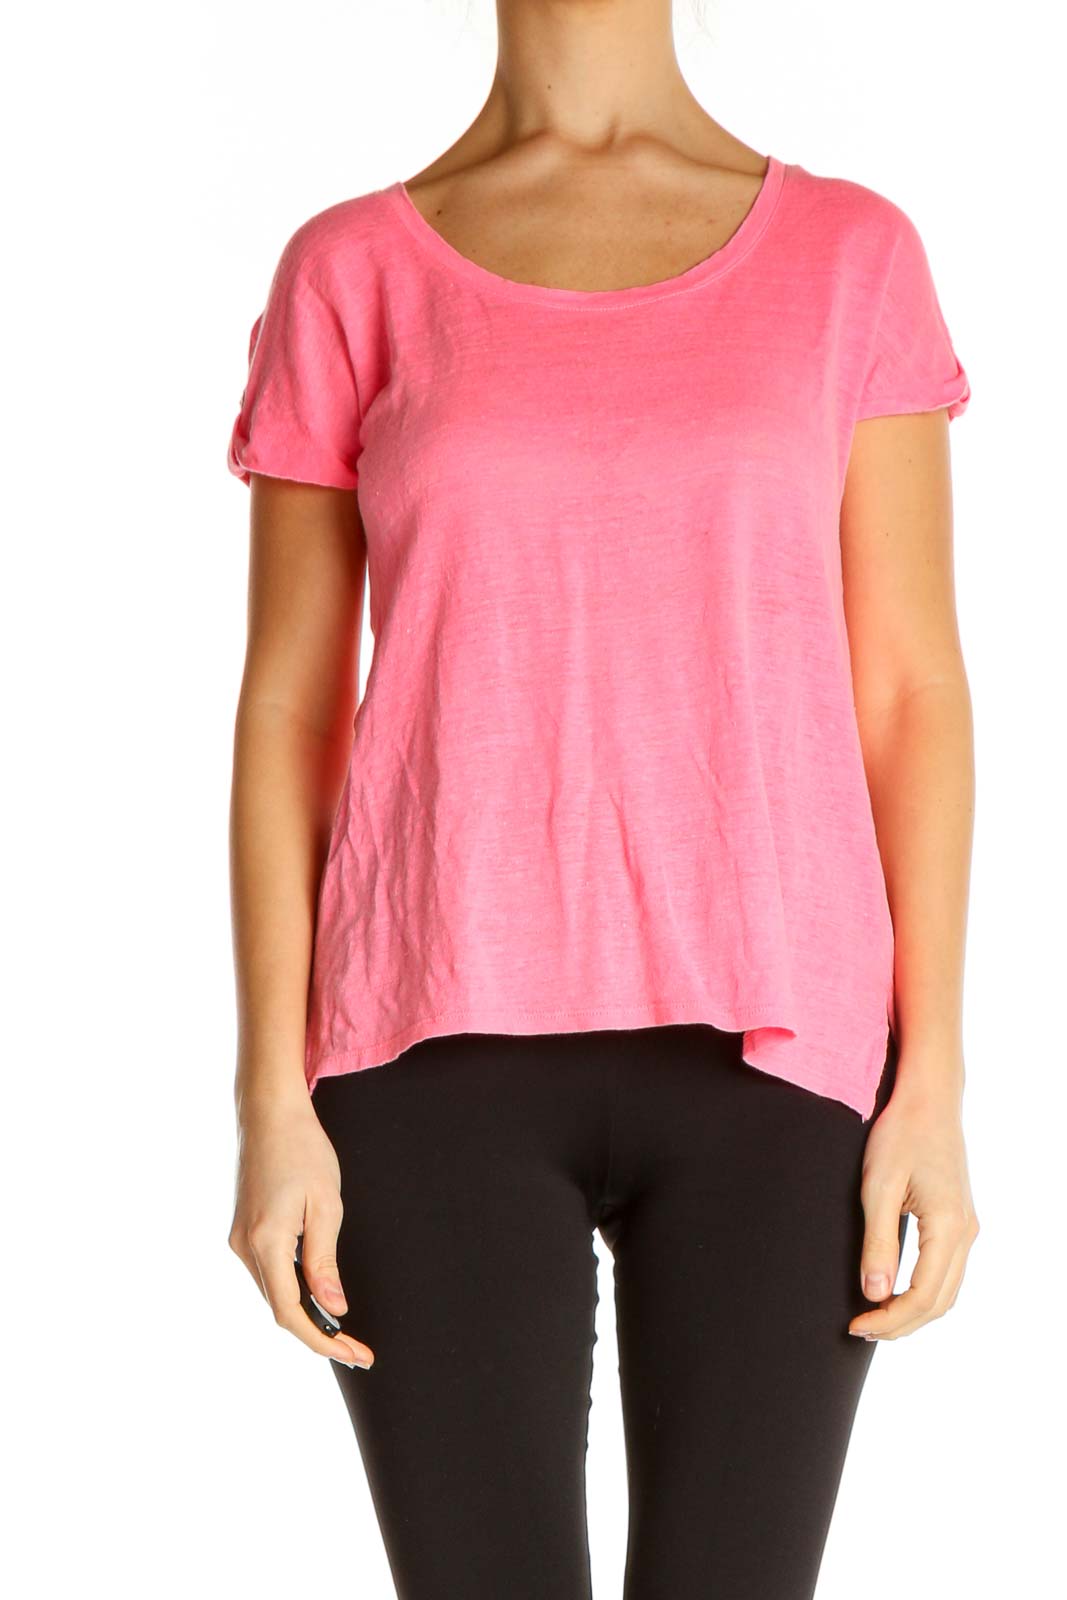 Pink Solid Casual T-Shirt Front